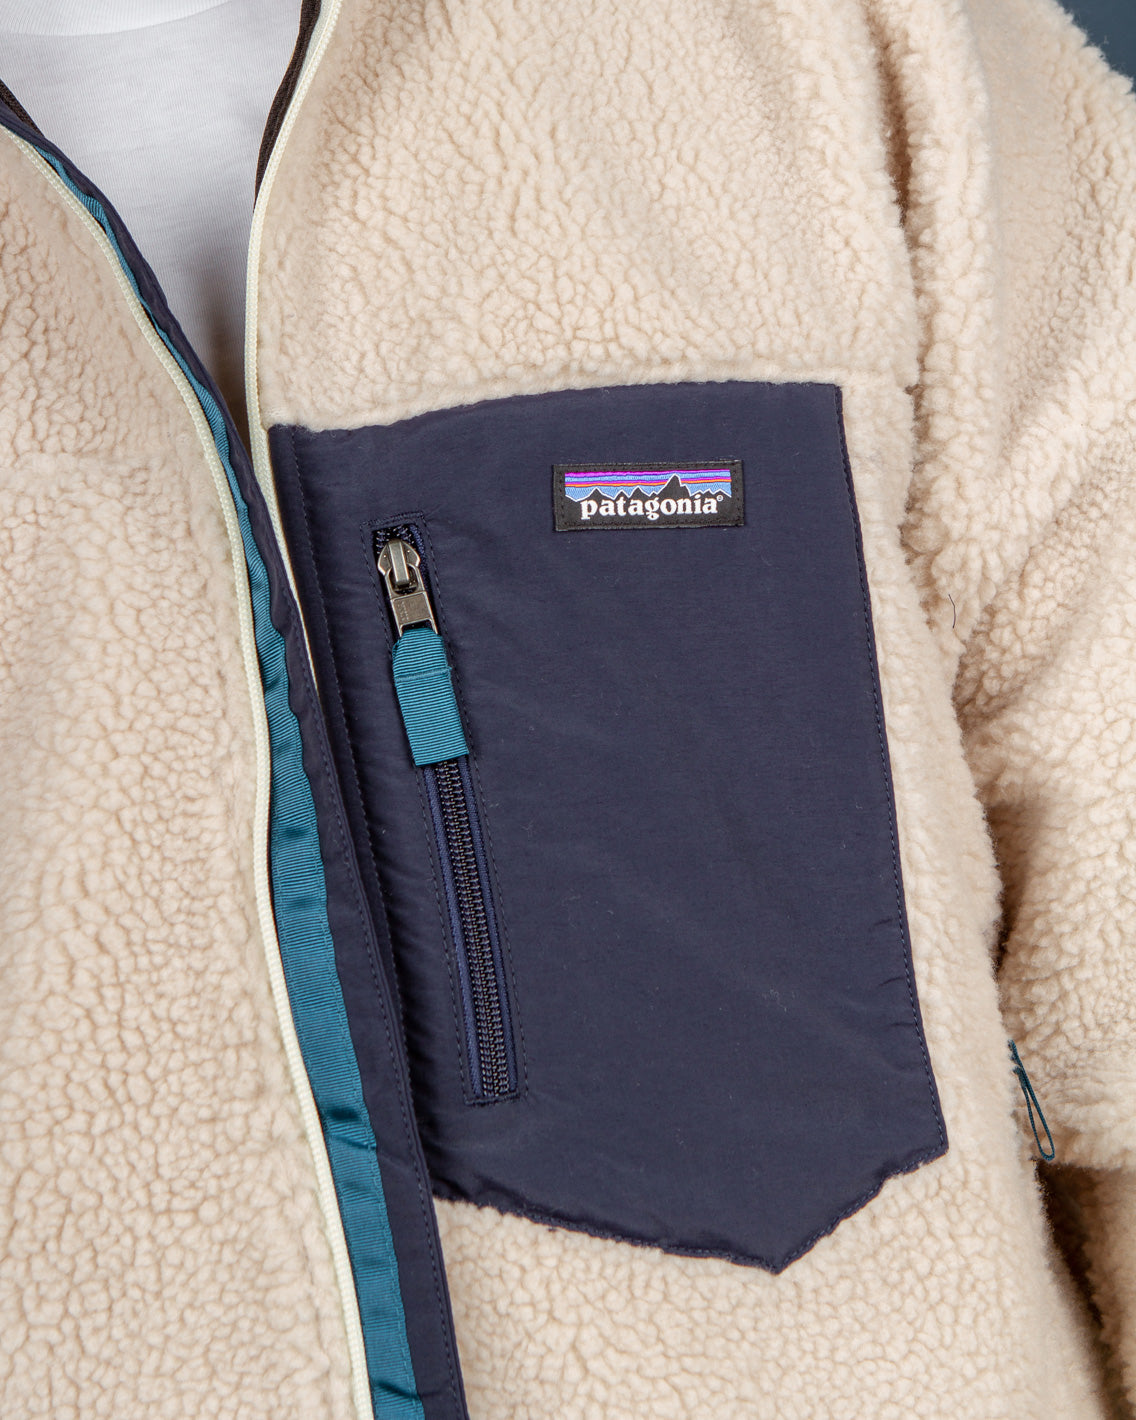 An Iconic jacket in the Patagonia range, the Retro-X in a natural colourway is a warm and windproof, comfortable fleece. Made using partially recycled Sherpa fabric that's ready to take on any chills with ease. Shop Patagonia Fleece at FallenFront.